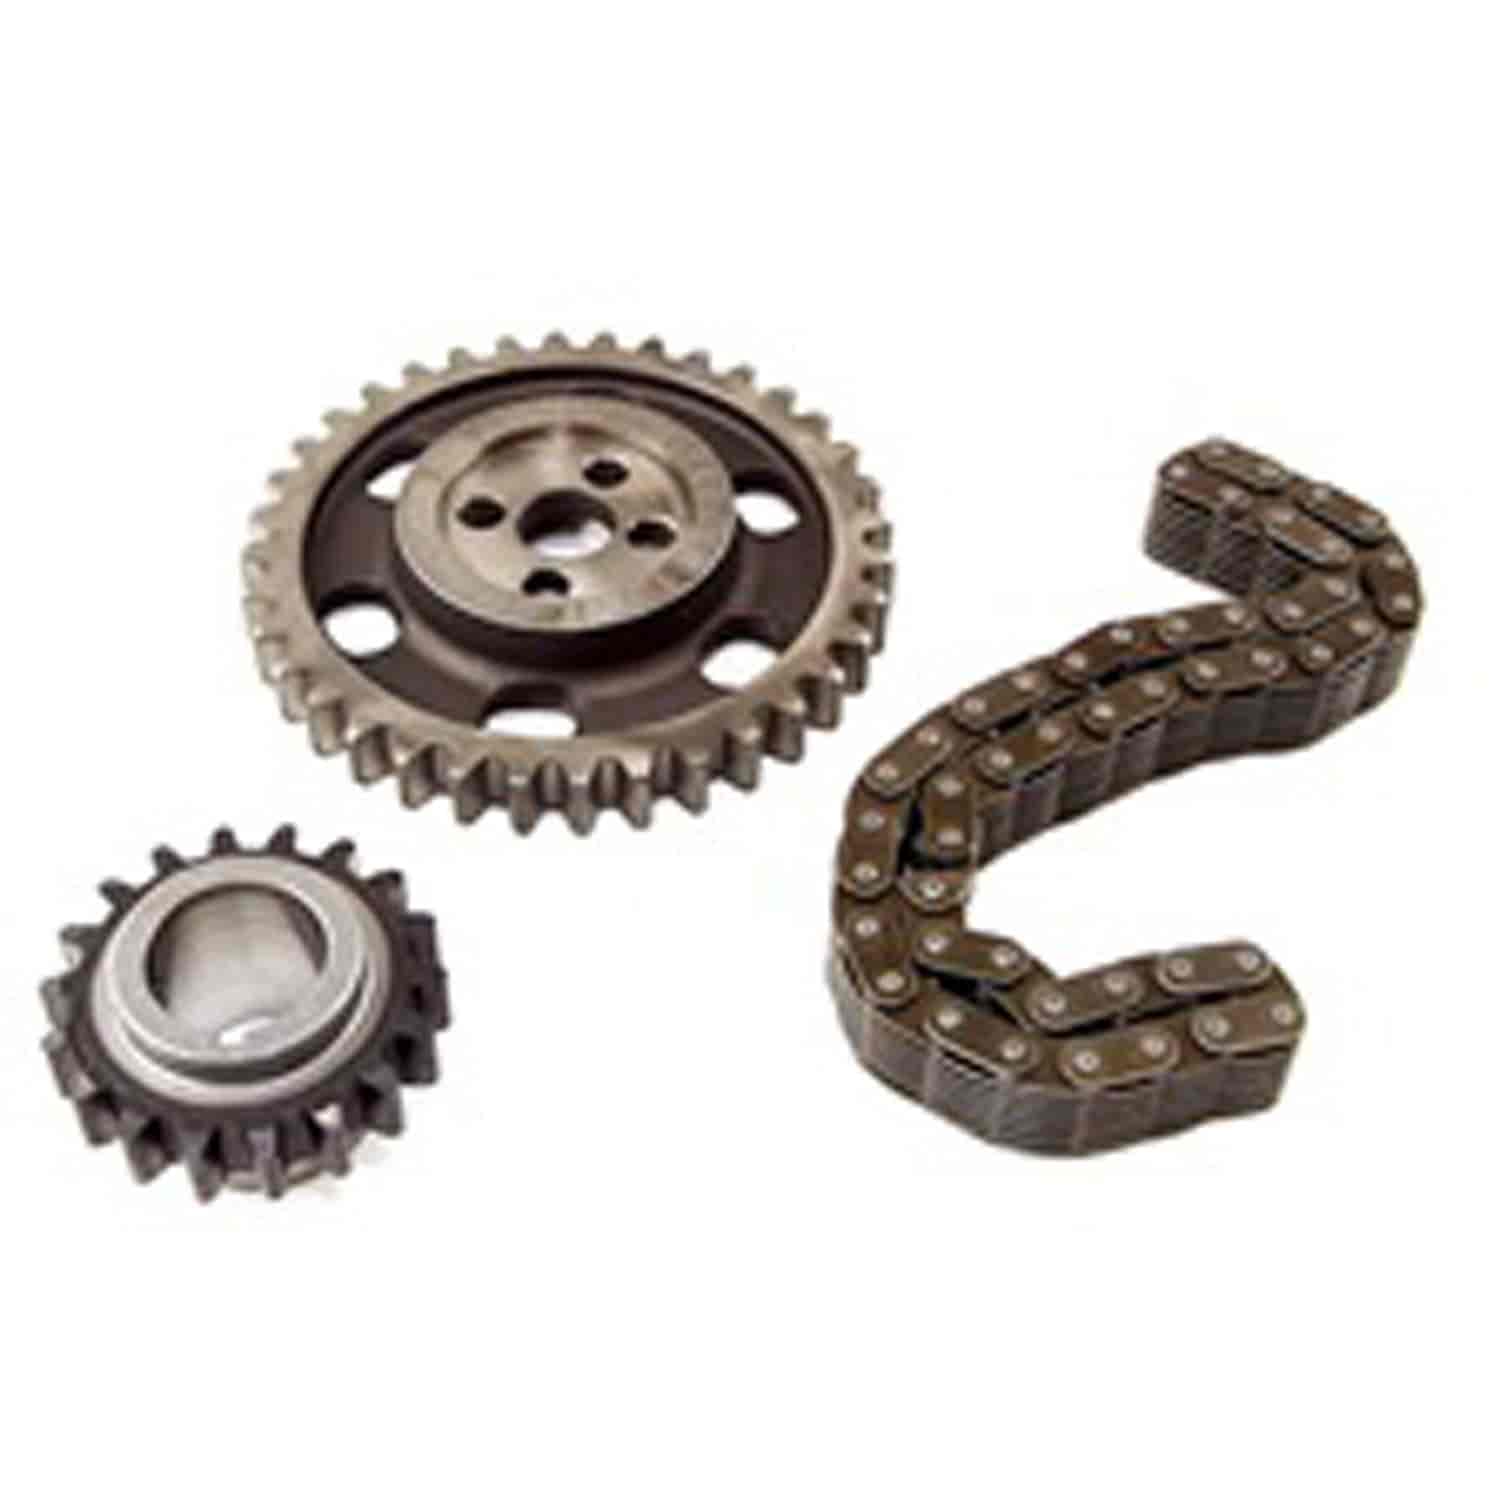 Timing Chain Kit 134 CI L-Head With Chain Driven Camshaft 1941-1945 MB 1941-1945 Ford GPW